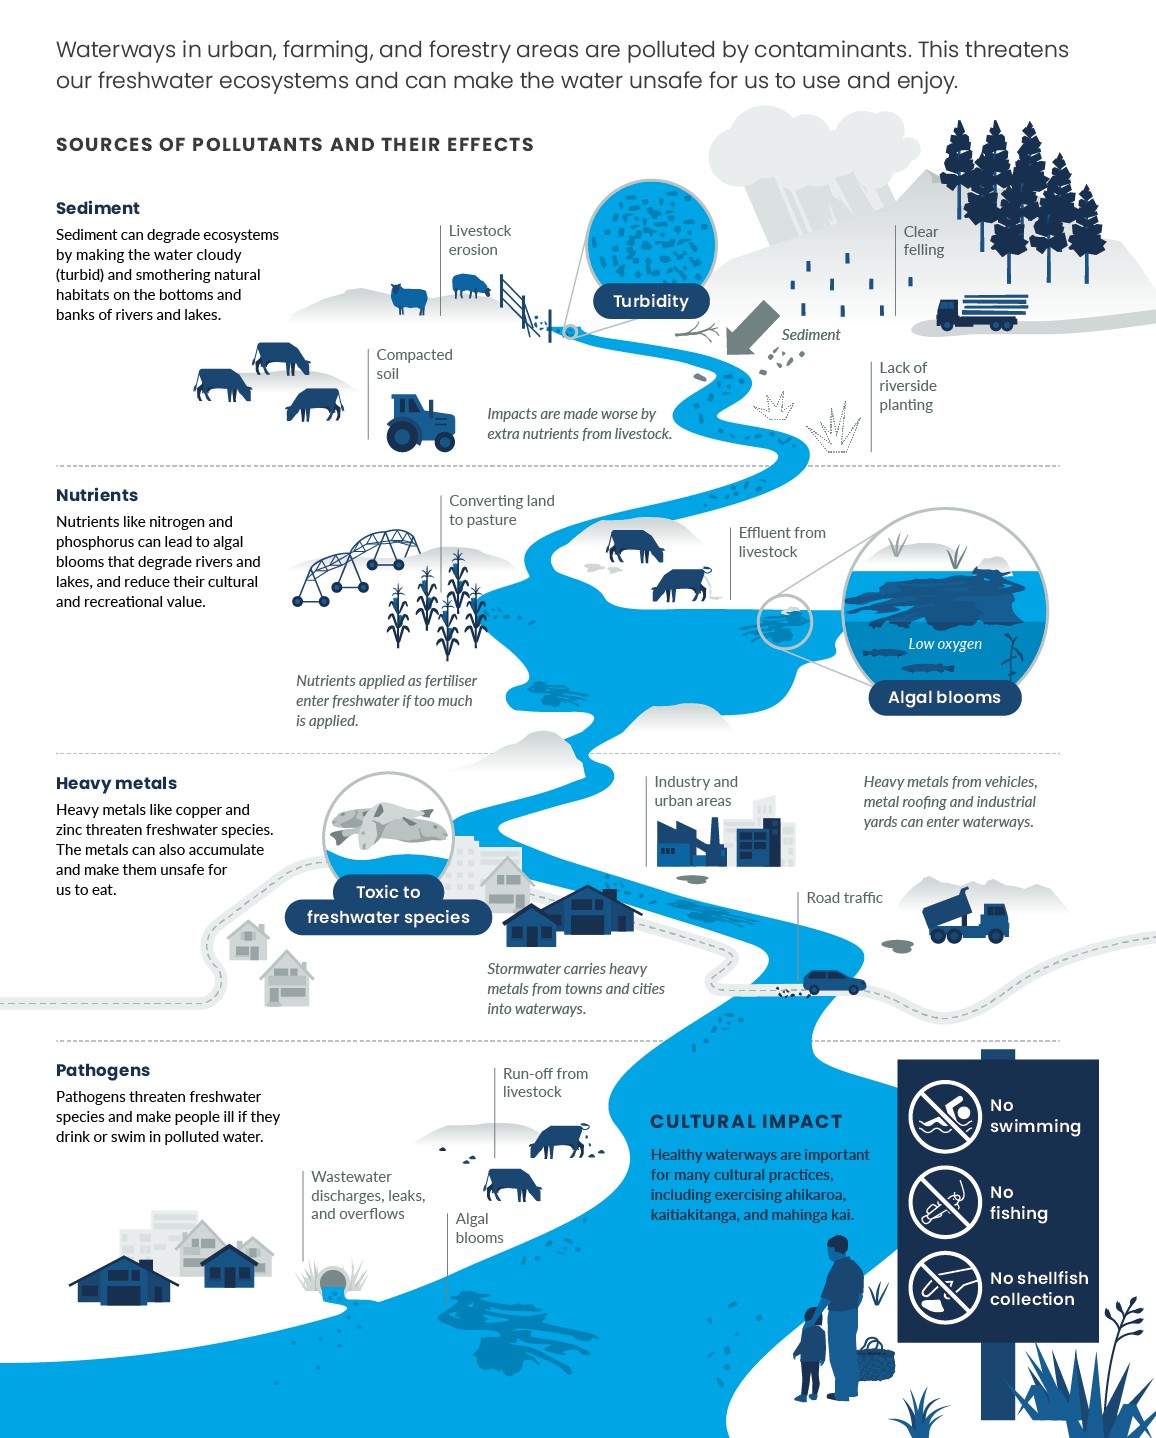 Our activities are polluting the freshwater environment. Infographic.